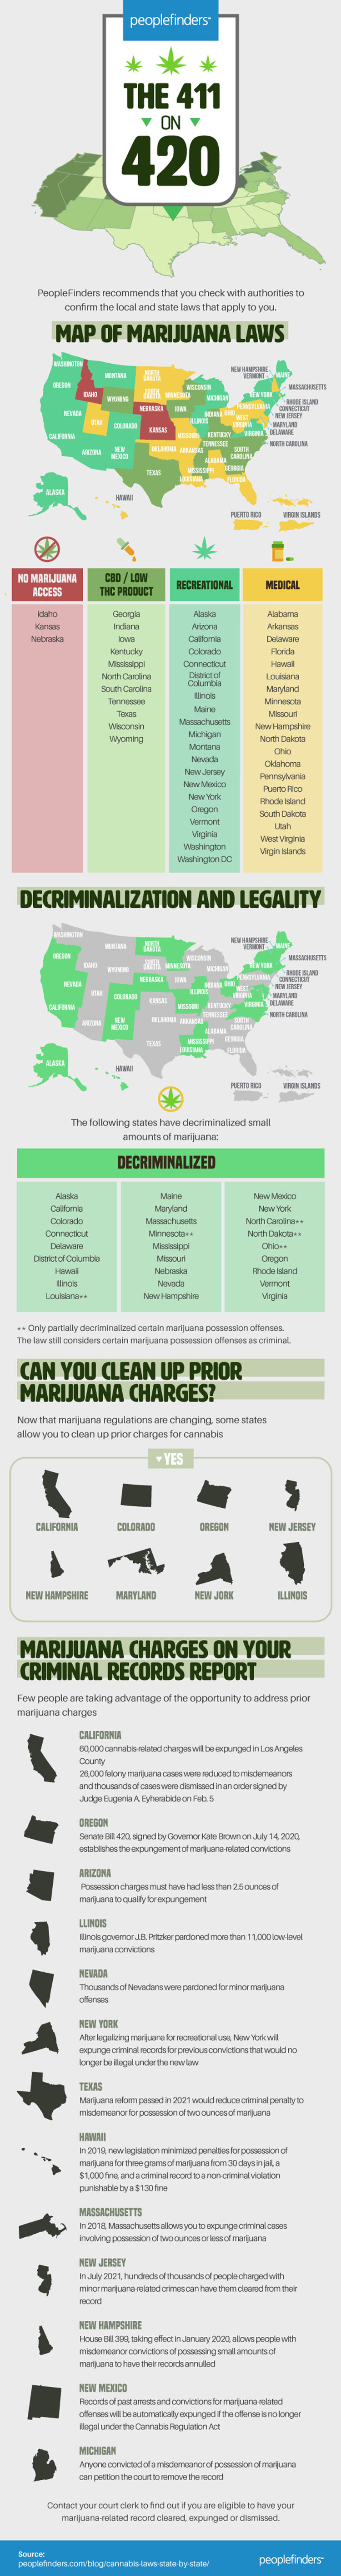 The 411 on 420: Is Marijuana Legal in Your State?